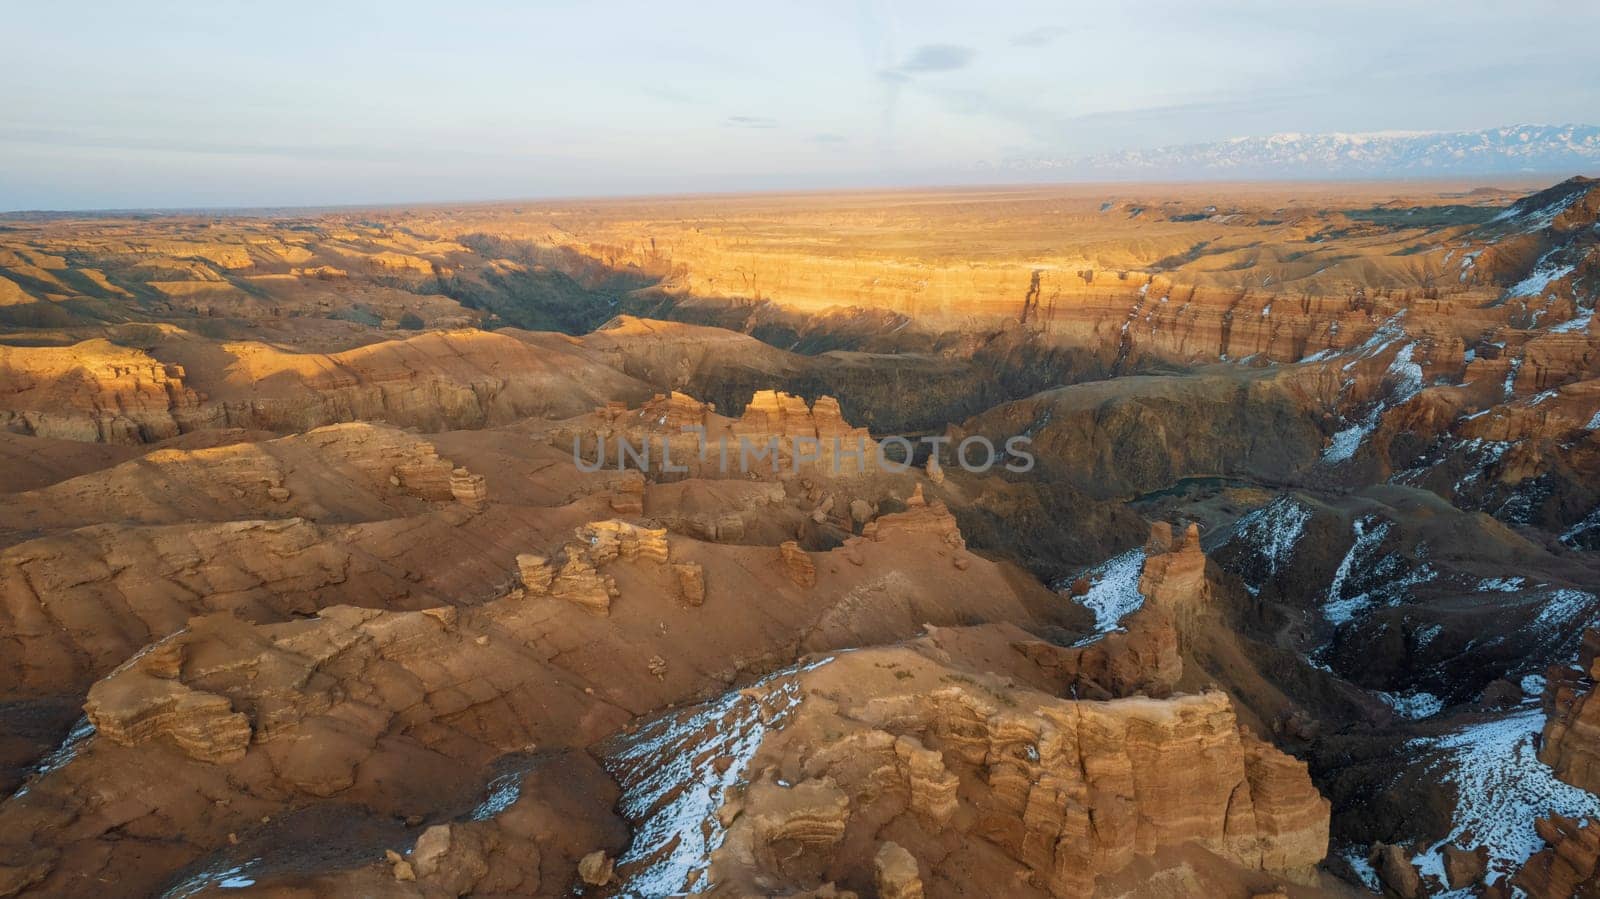 Charyn Grand Canyon with orange rock walls. Aerial view from the drone of the steep canyon walls, cracks and tunnels. There is snow in places. Beautiful sunset and sunrise. Brother of the Grand Canyon